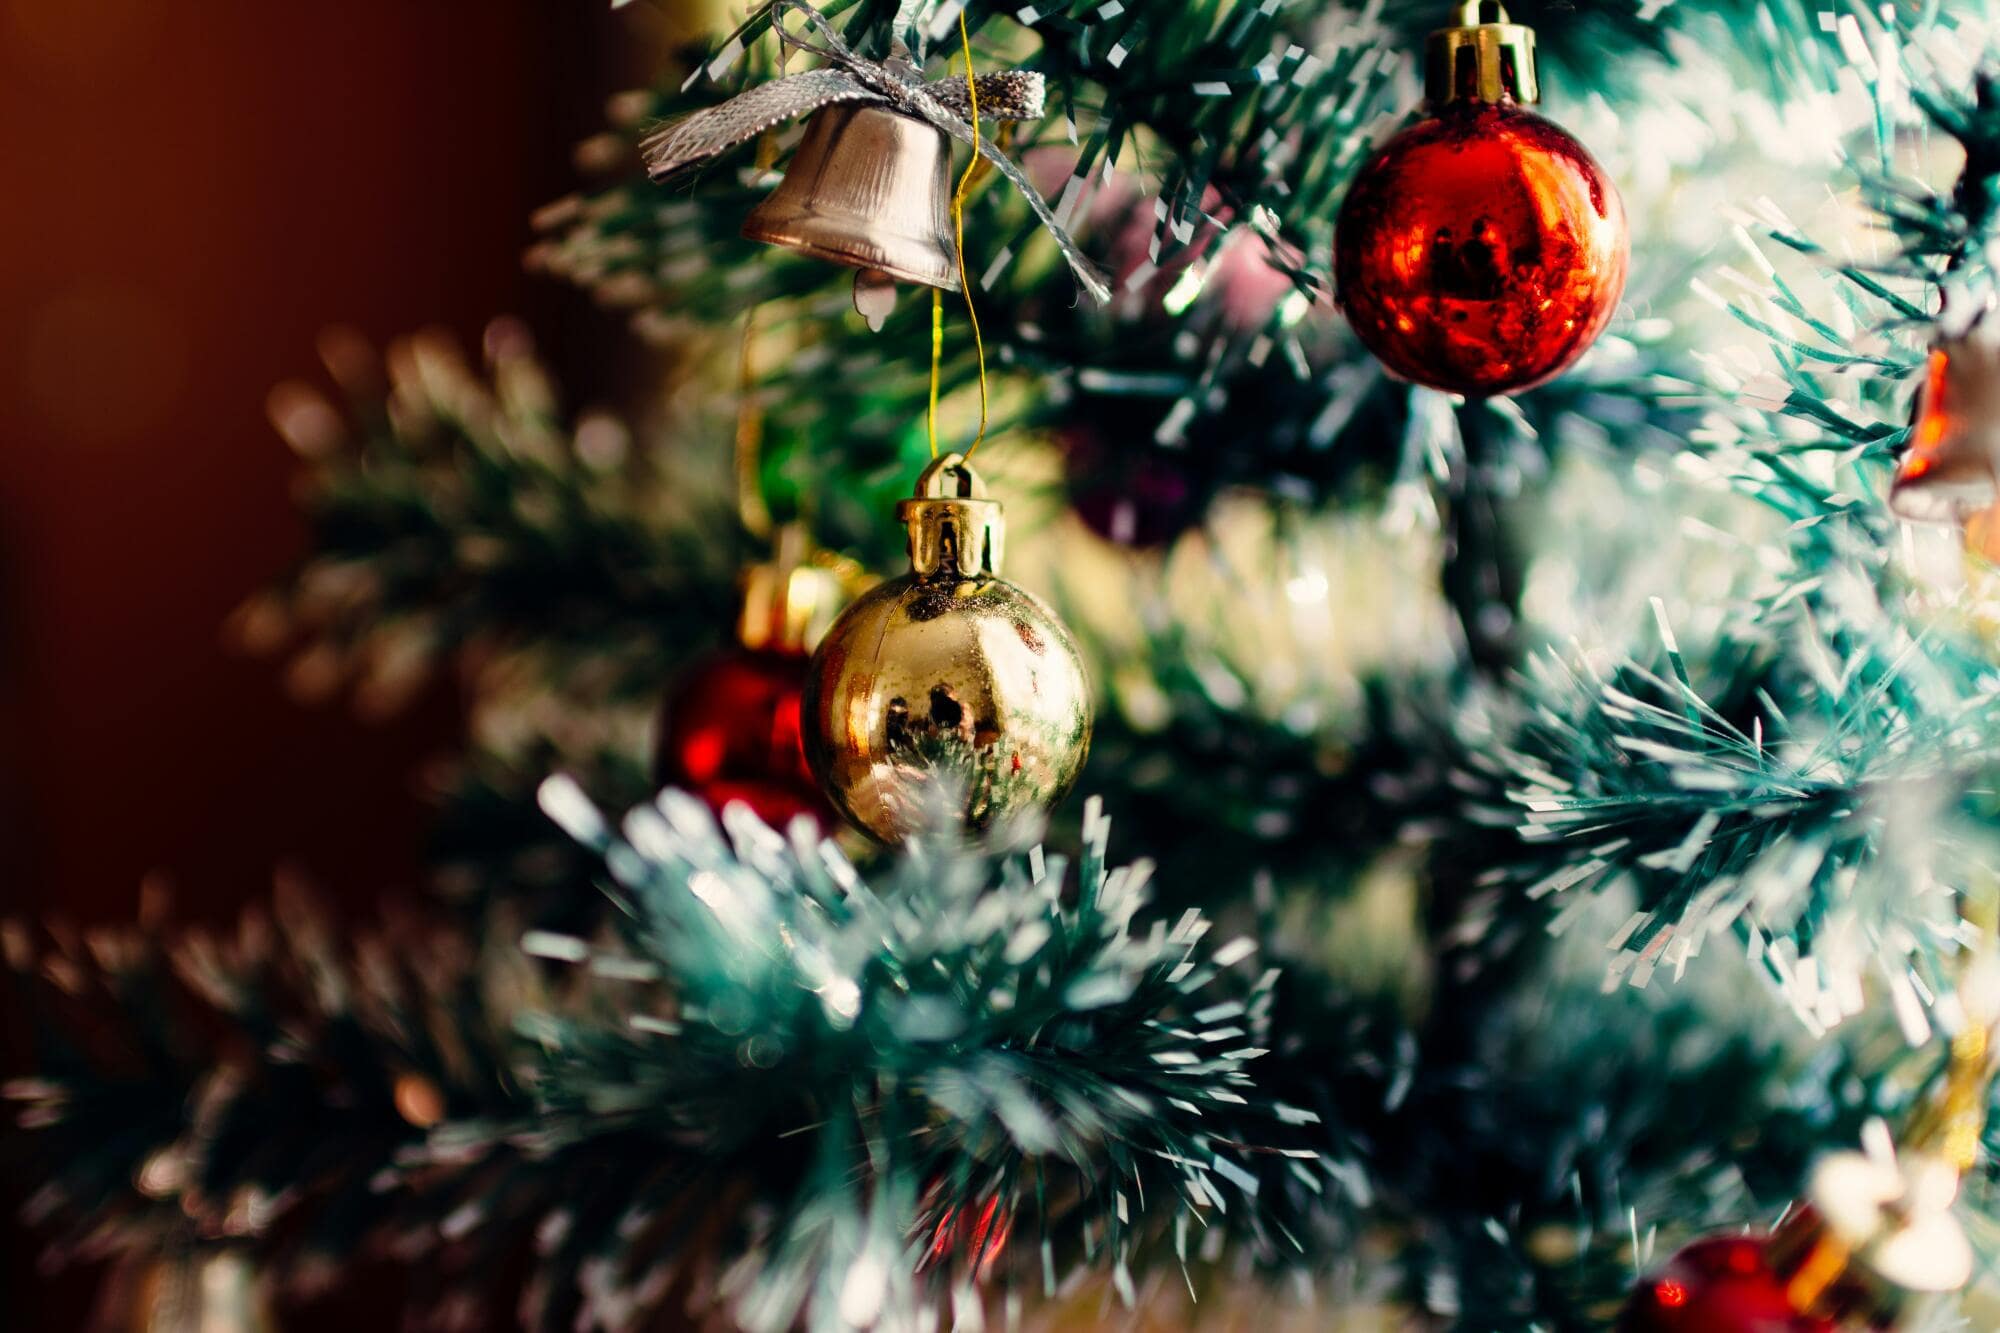 HOA Holiday Decorating: Tips for a Festive and Welcoming Community